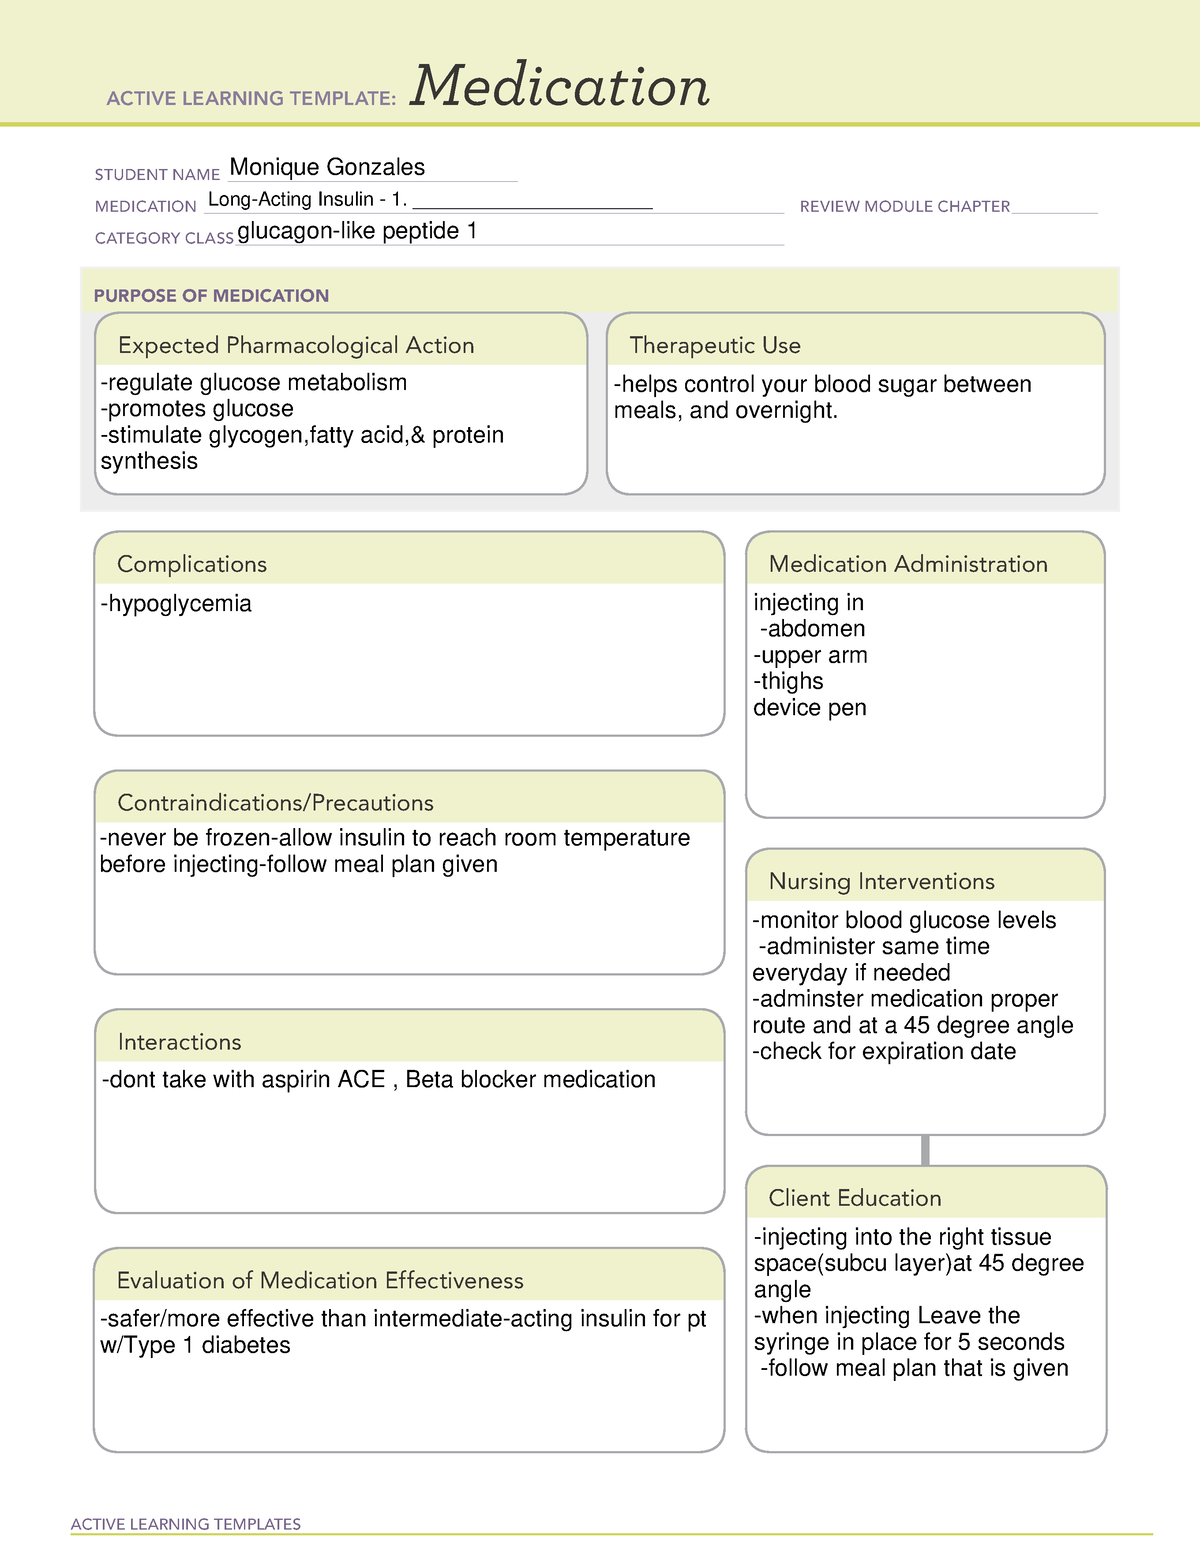 long-acting-insulin-active-learning-template-active-learning